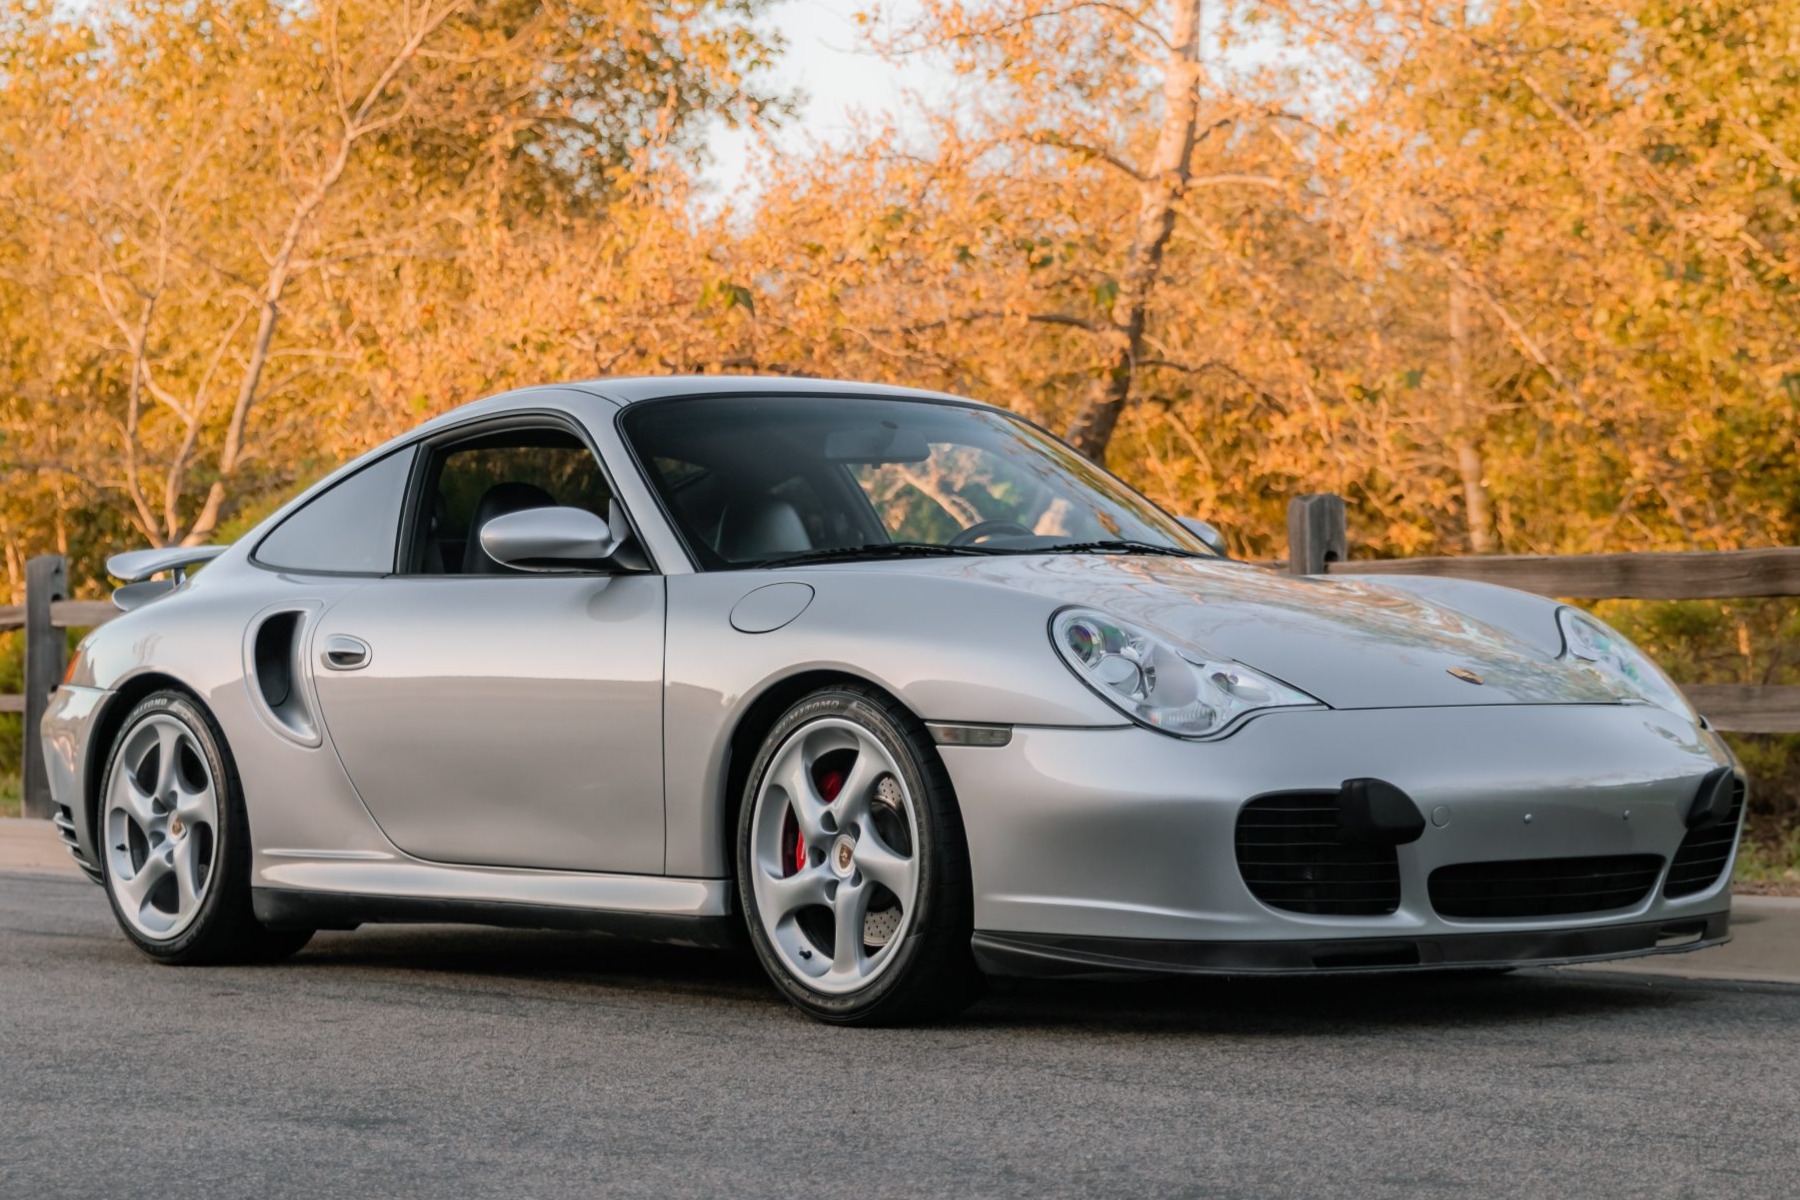 Used 31k-Mile 2001 Porsche 911 Turbo Coupe 6-Speed Review